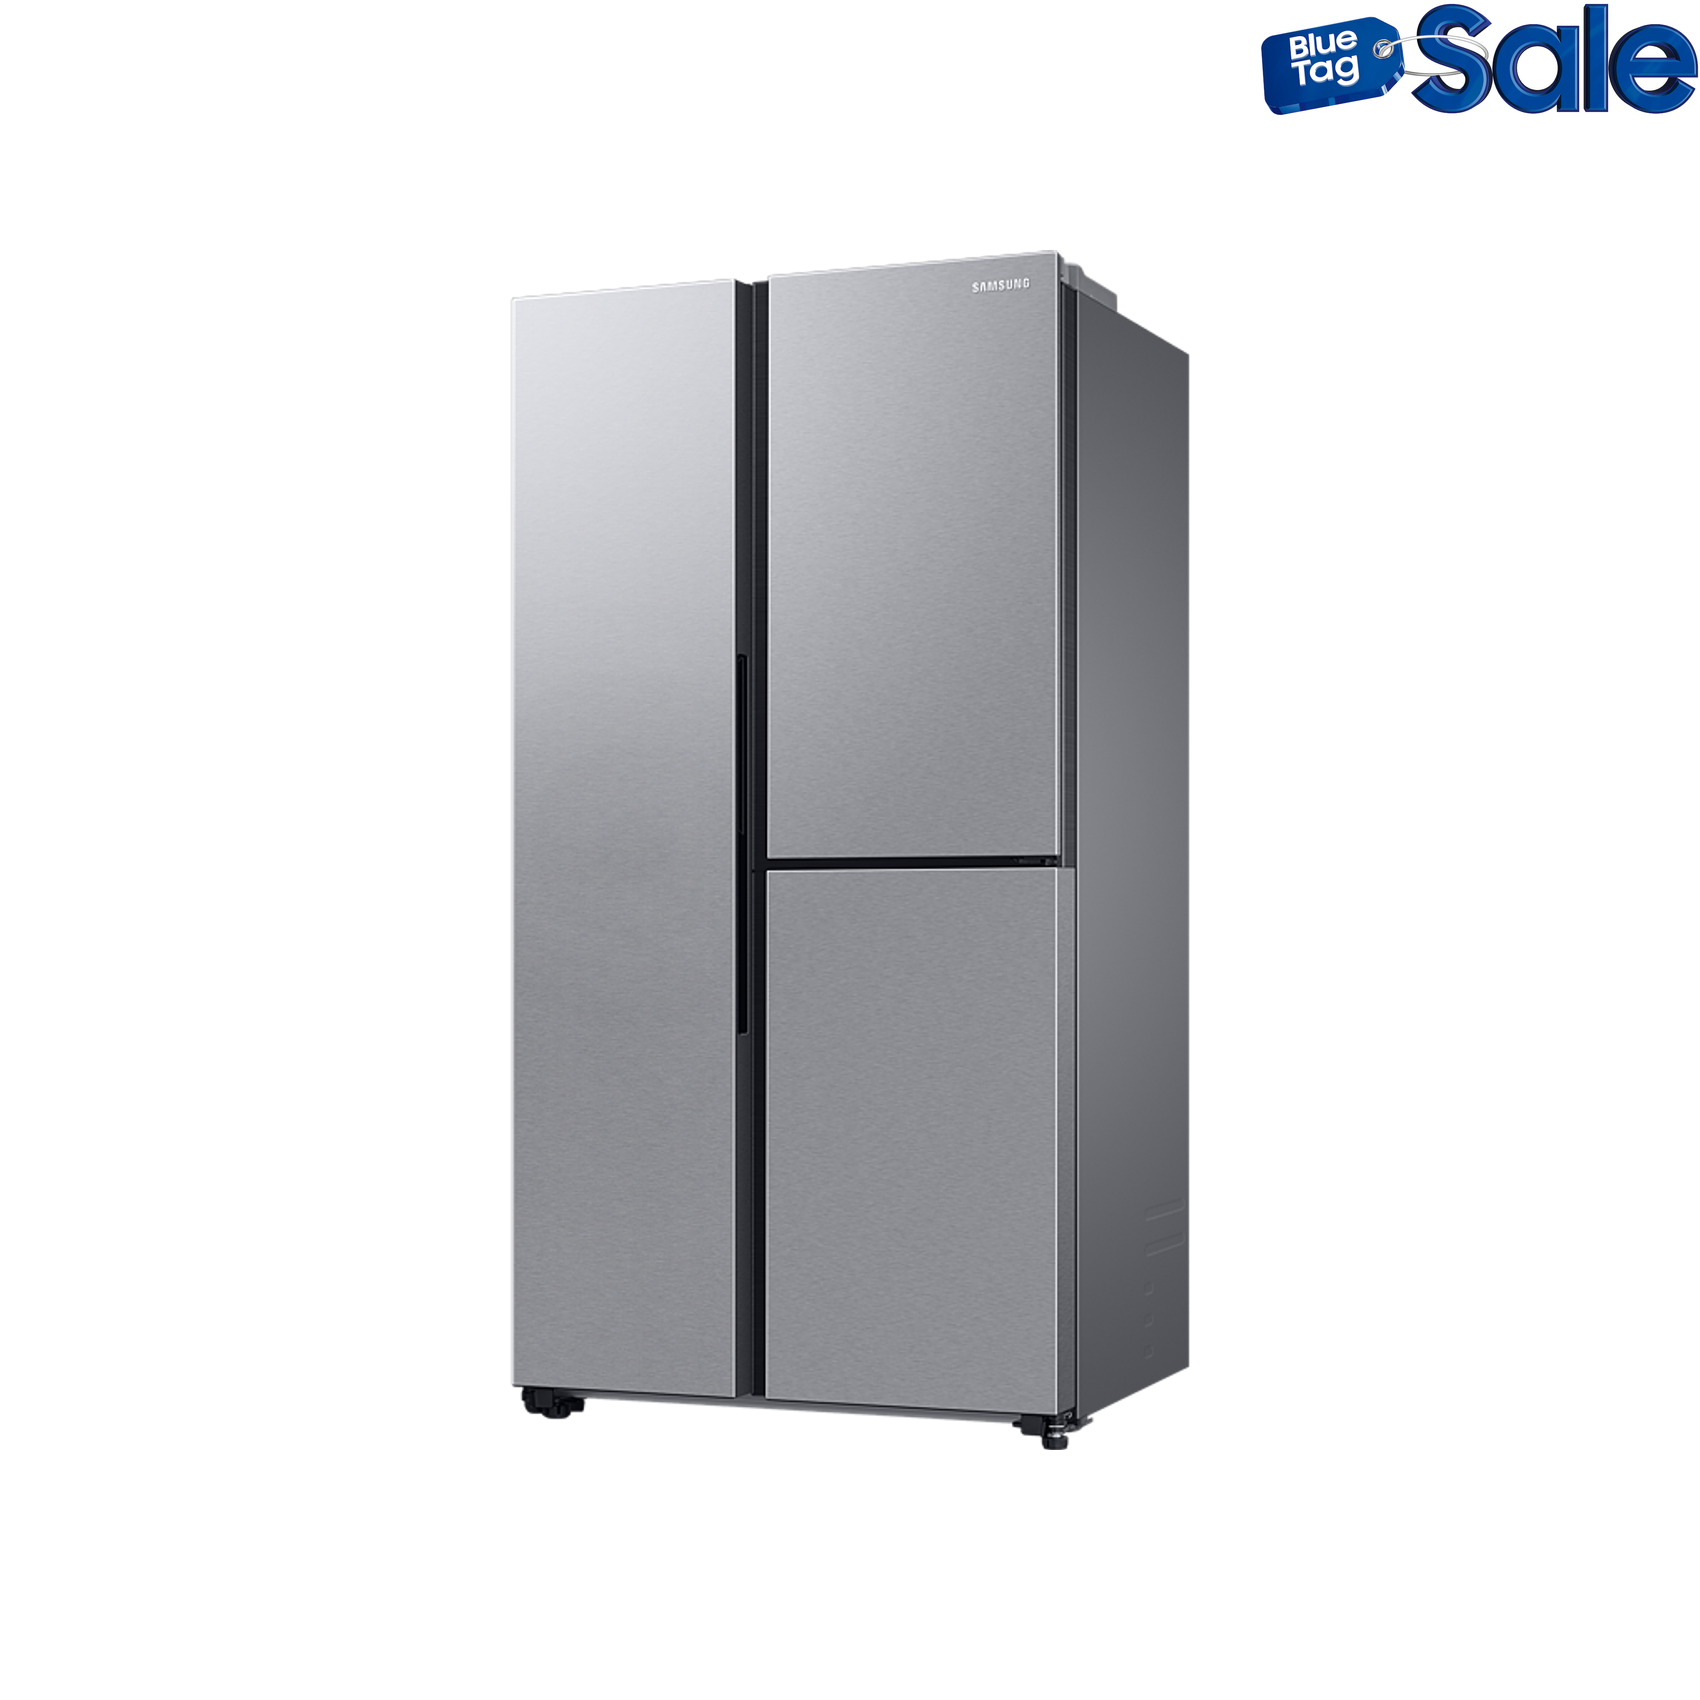 Samsung 595L Nett Food Showcase Side by Side Fridge with Beverage Centre™ - Clean Steel Finish (Photo: 6)